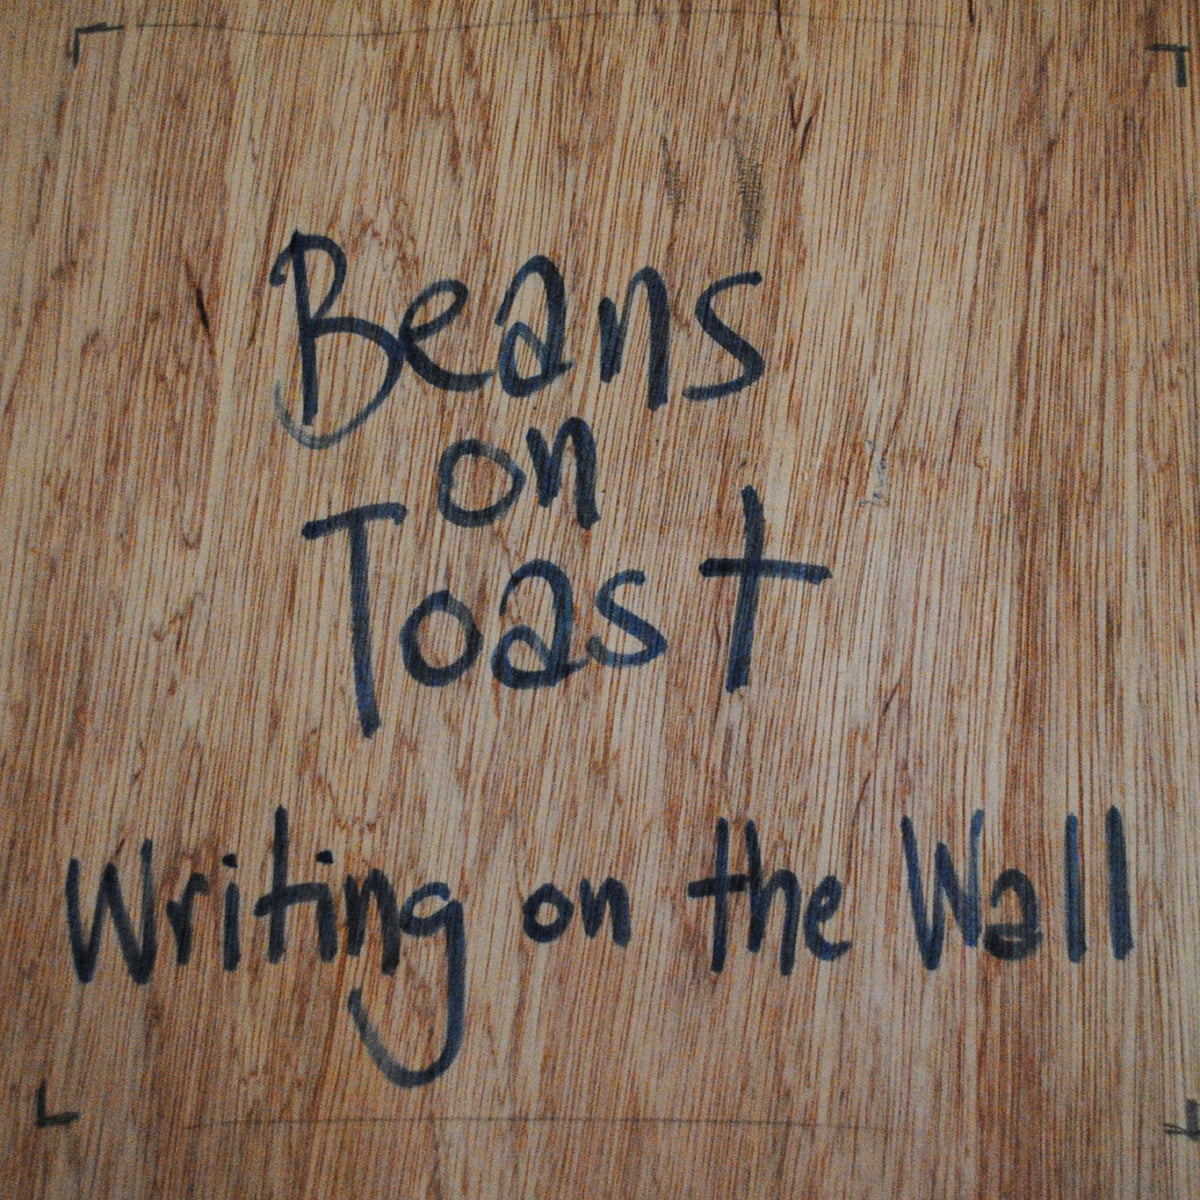 Beans On Toast: Writing On The Wall